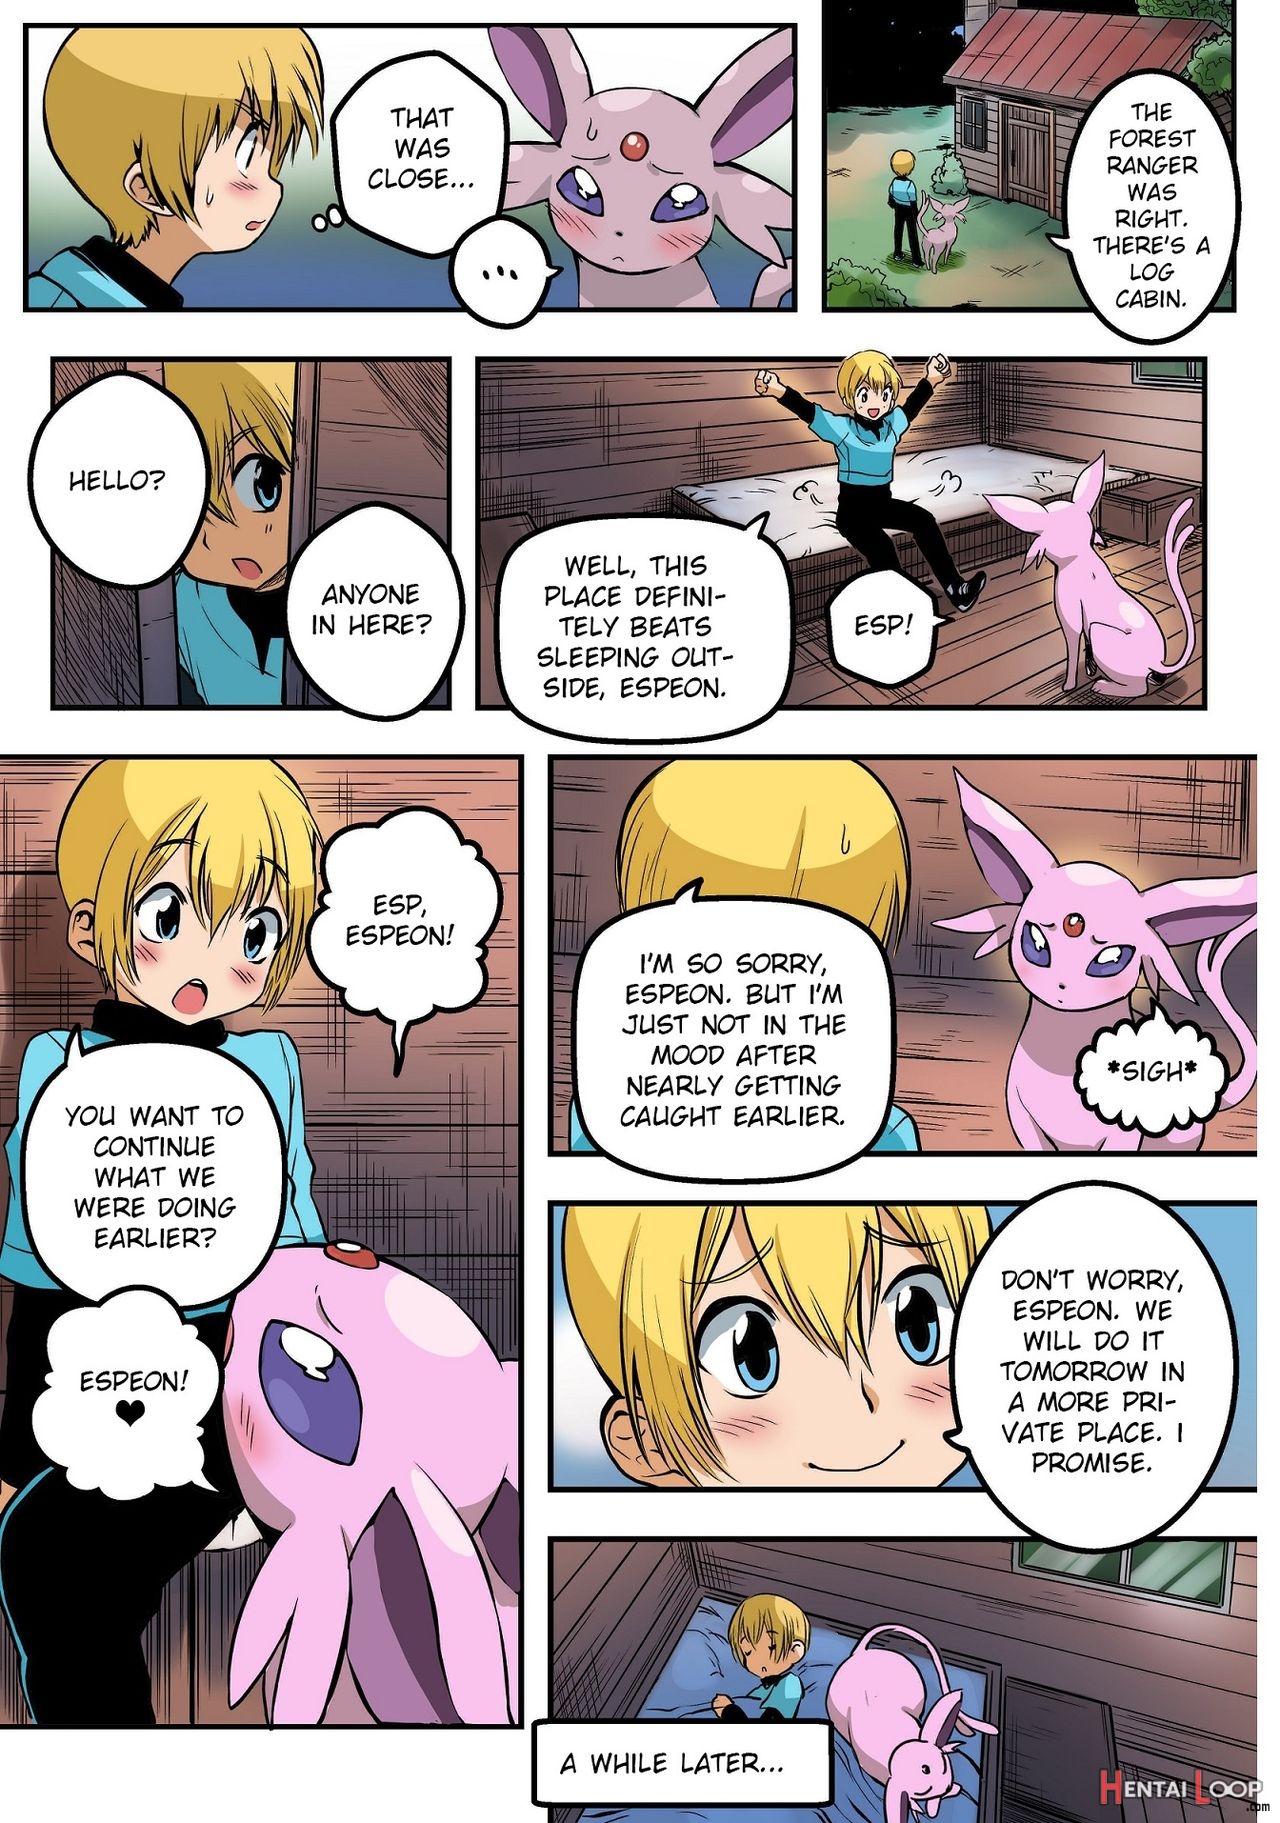 The Experiment Espeon page 3